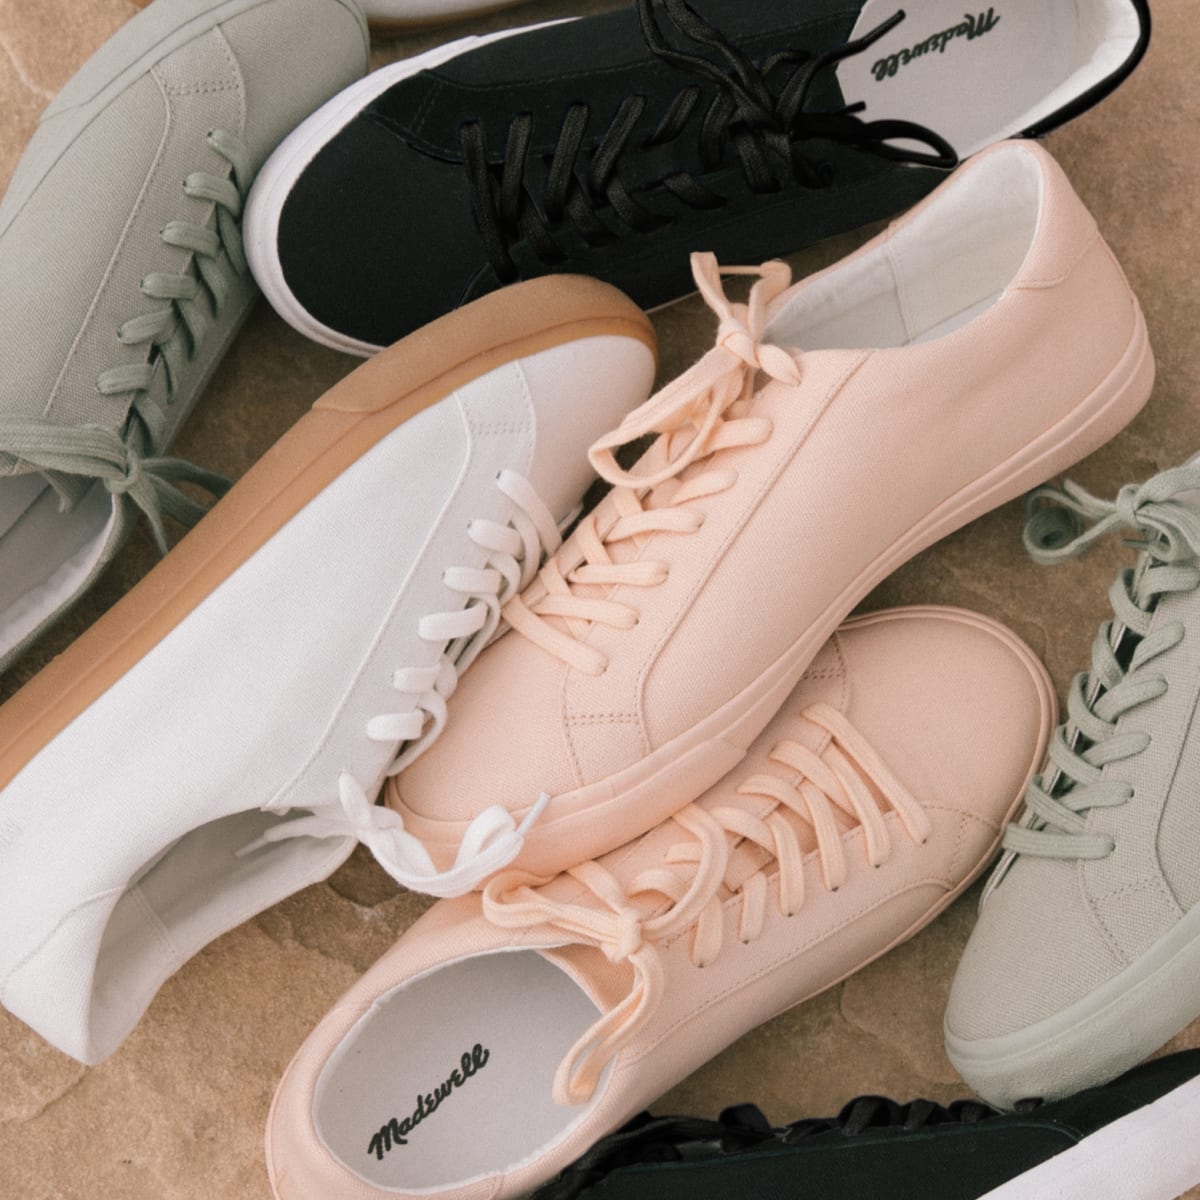 Like Every Other Fashion Brand, Madewell Designed a Pair of Sneakers -  Fashionista